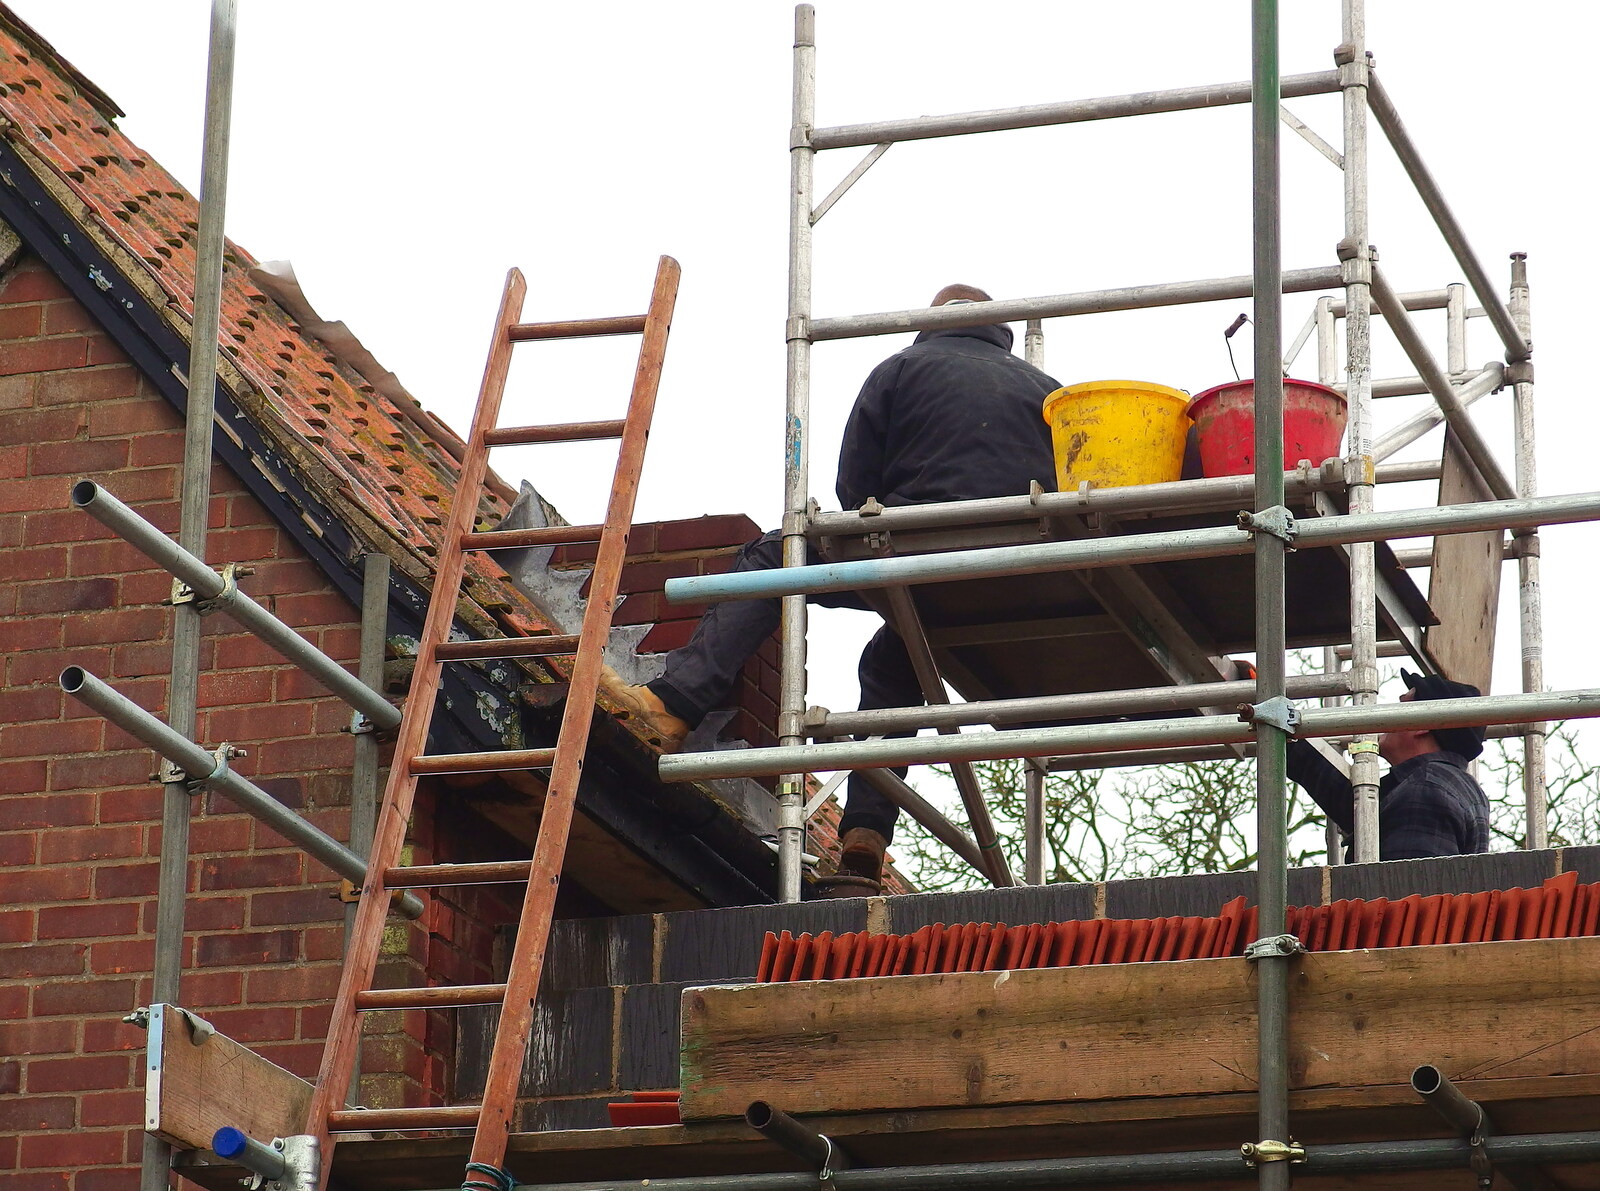 The kitchen chimney is removed from A Ross Street Reunion, Hoxne, Suffolk - 25th January 2014